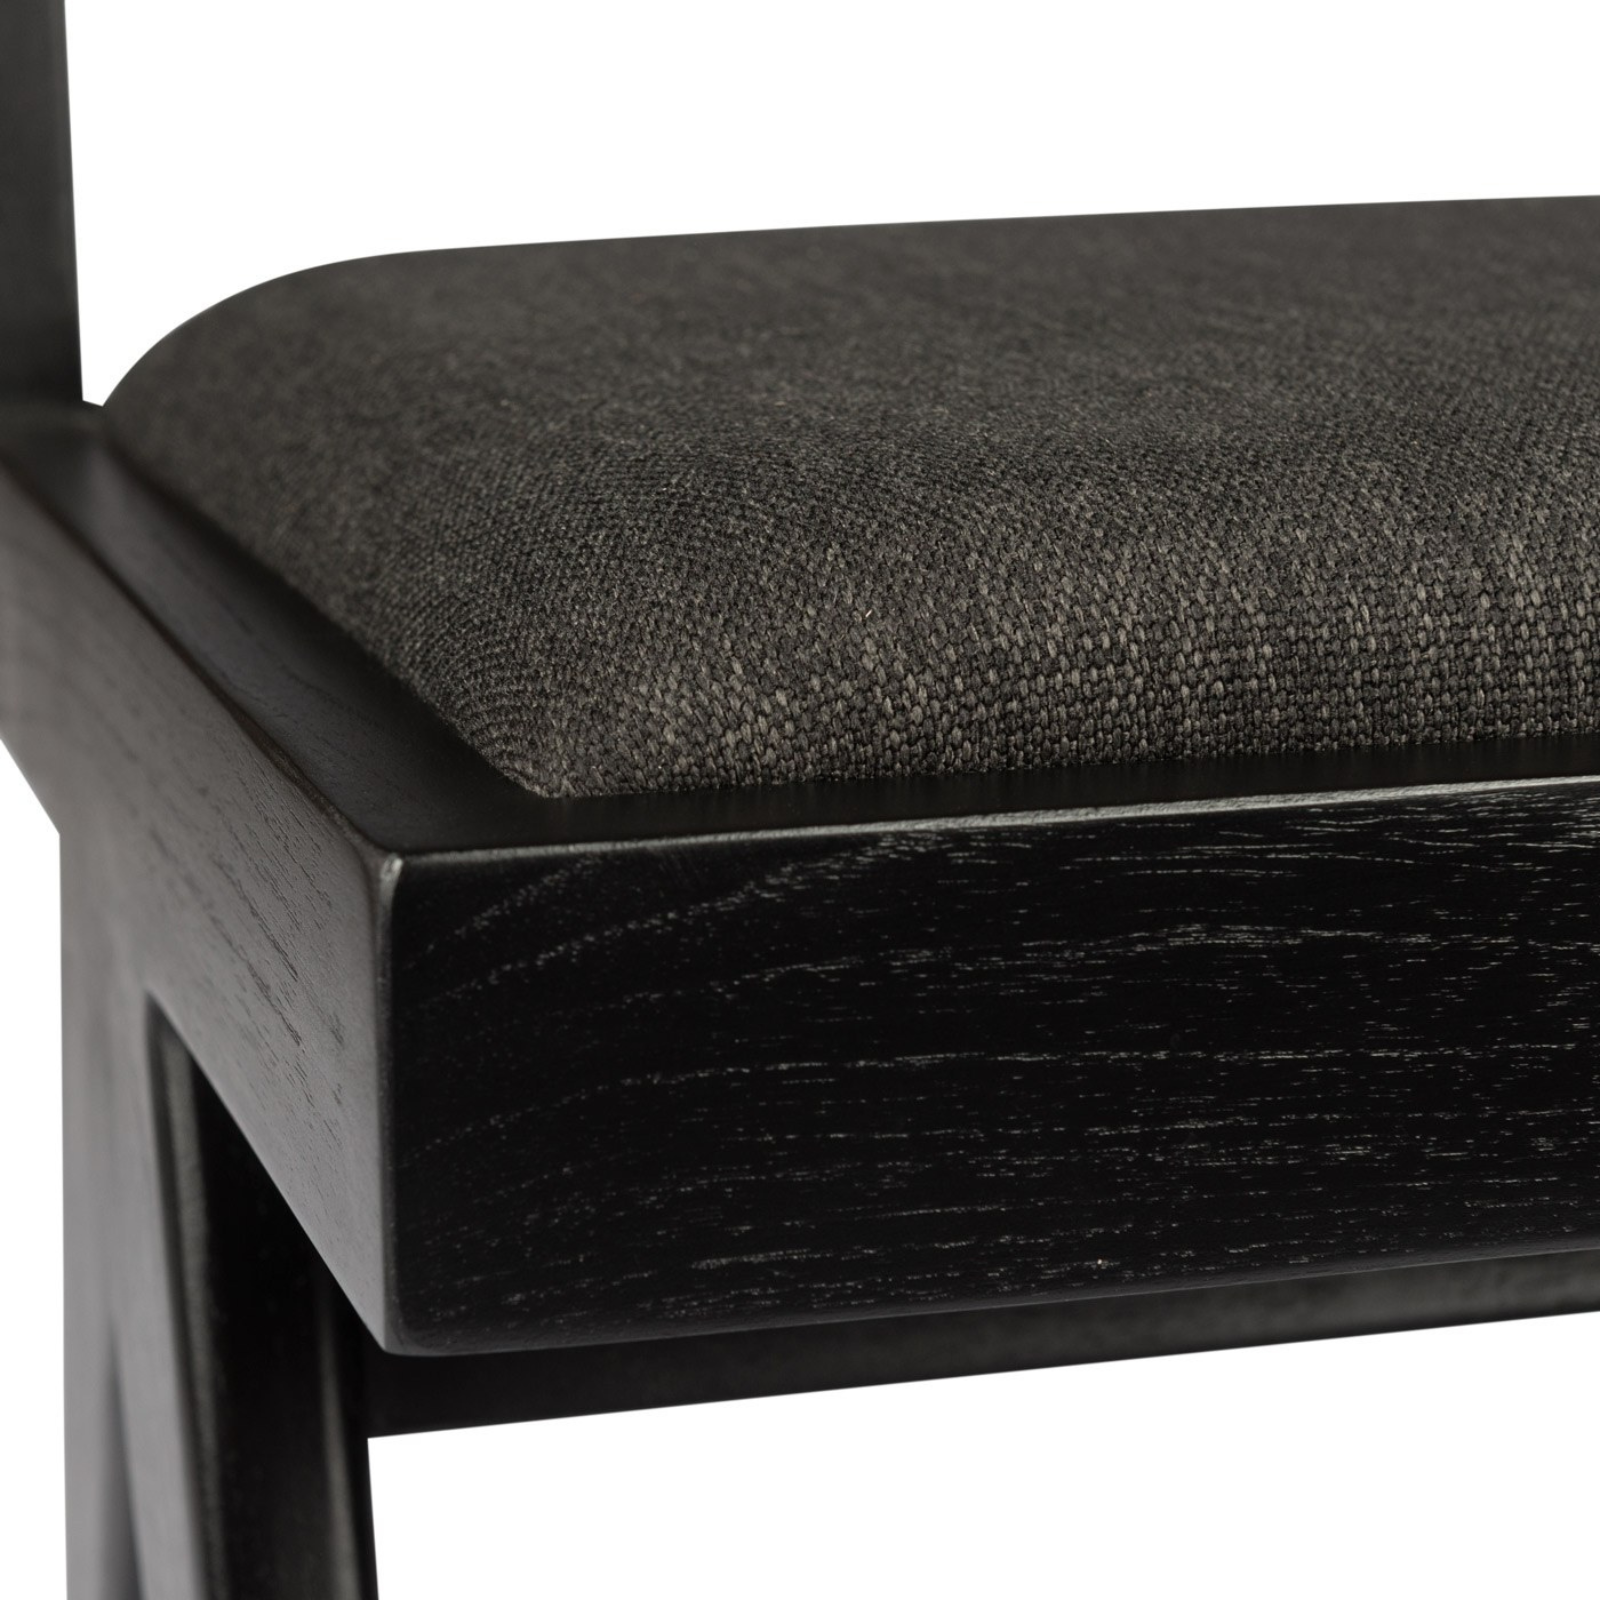 DETJER Dining Chair Upholstered Close Up